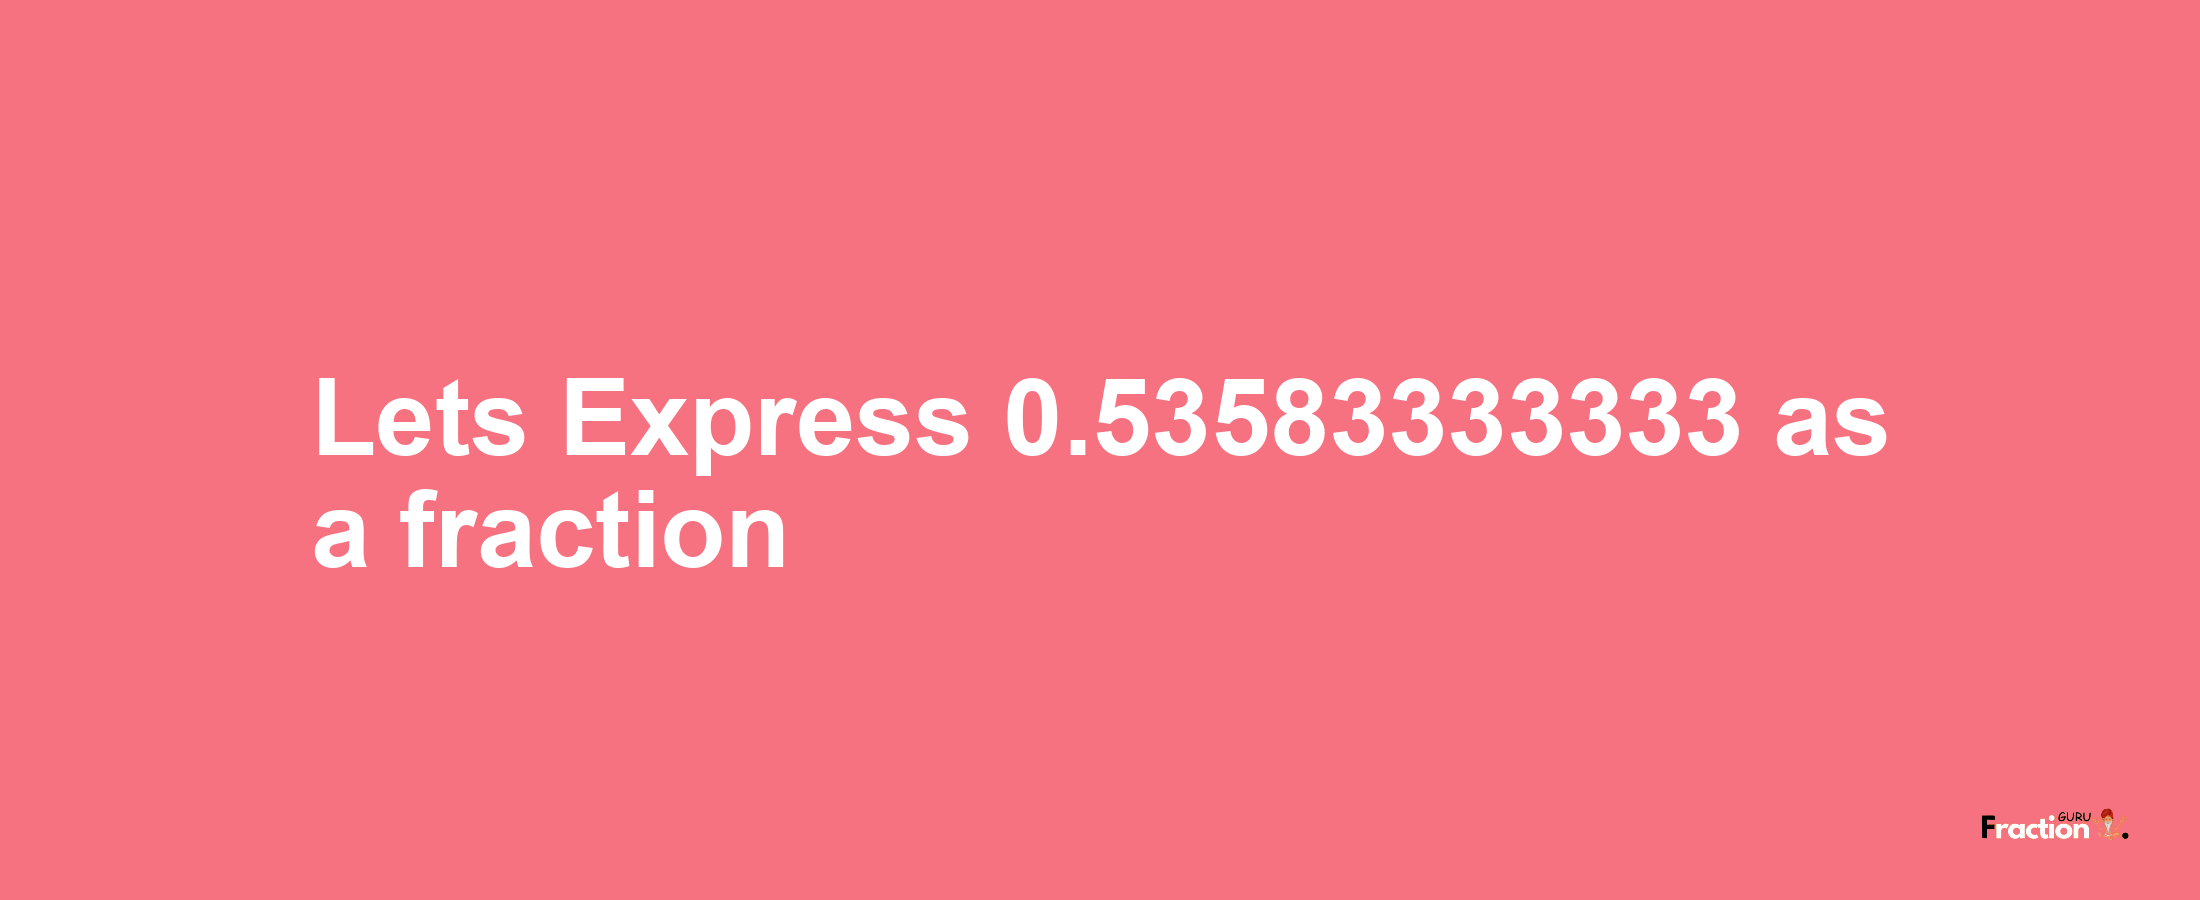 Lets Express 0.53583333333 as afraction